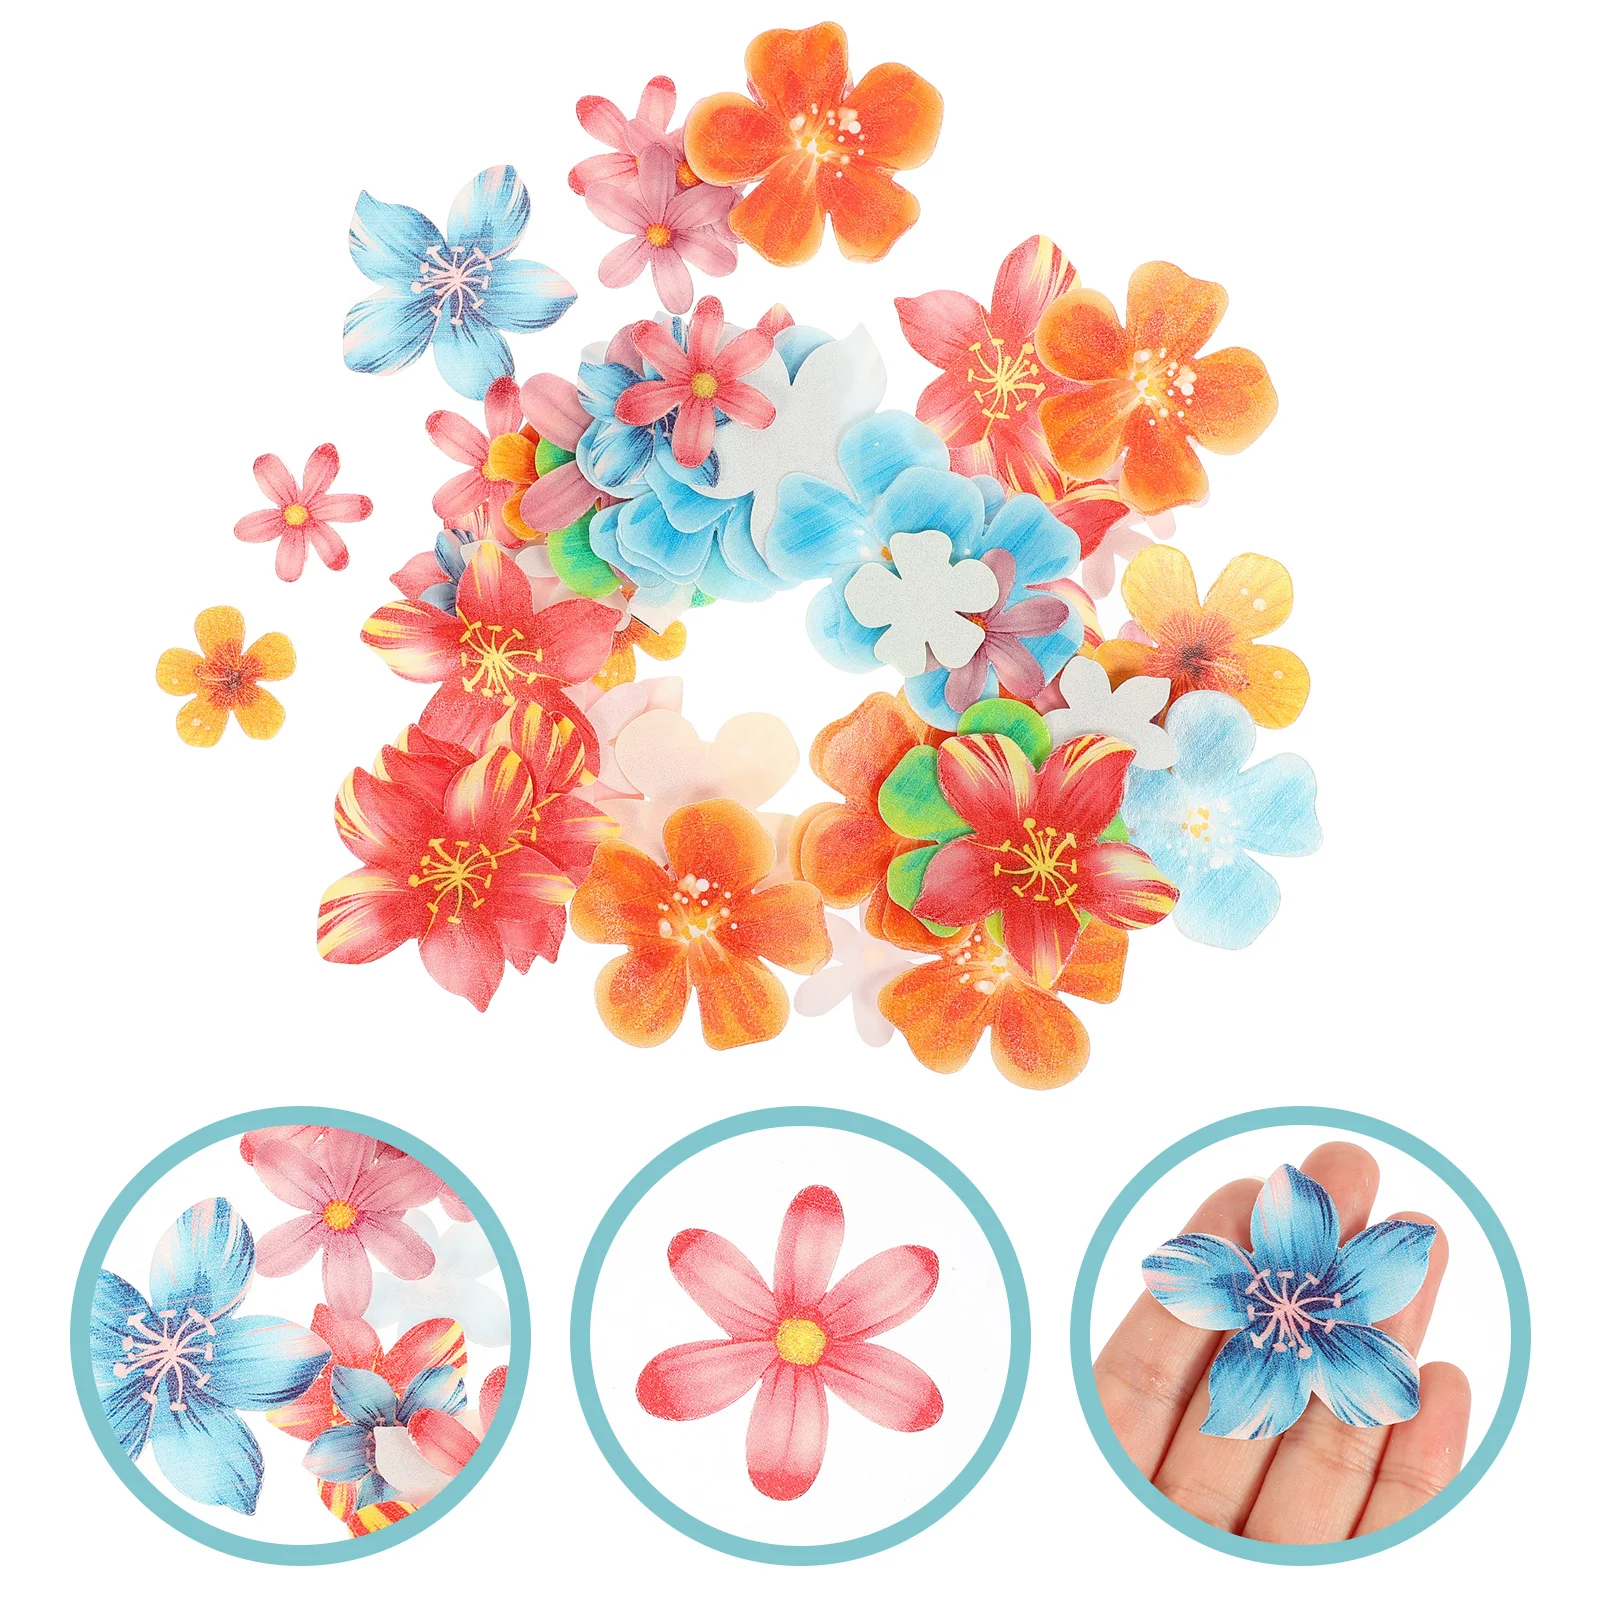 

Glutinous Rice Paper Florets Cake Adornments Toppers Cupcake Edible Dessert Flower Decorations Blossom Decors Wedding Ceremony